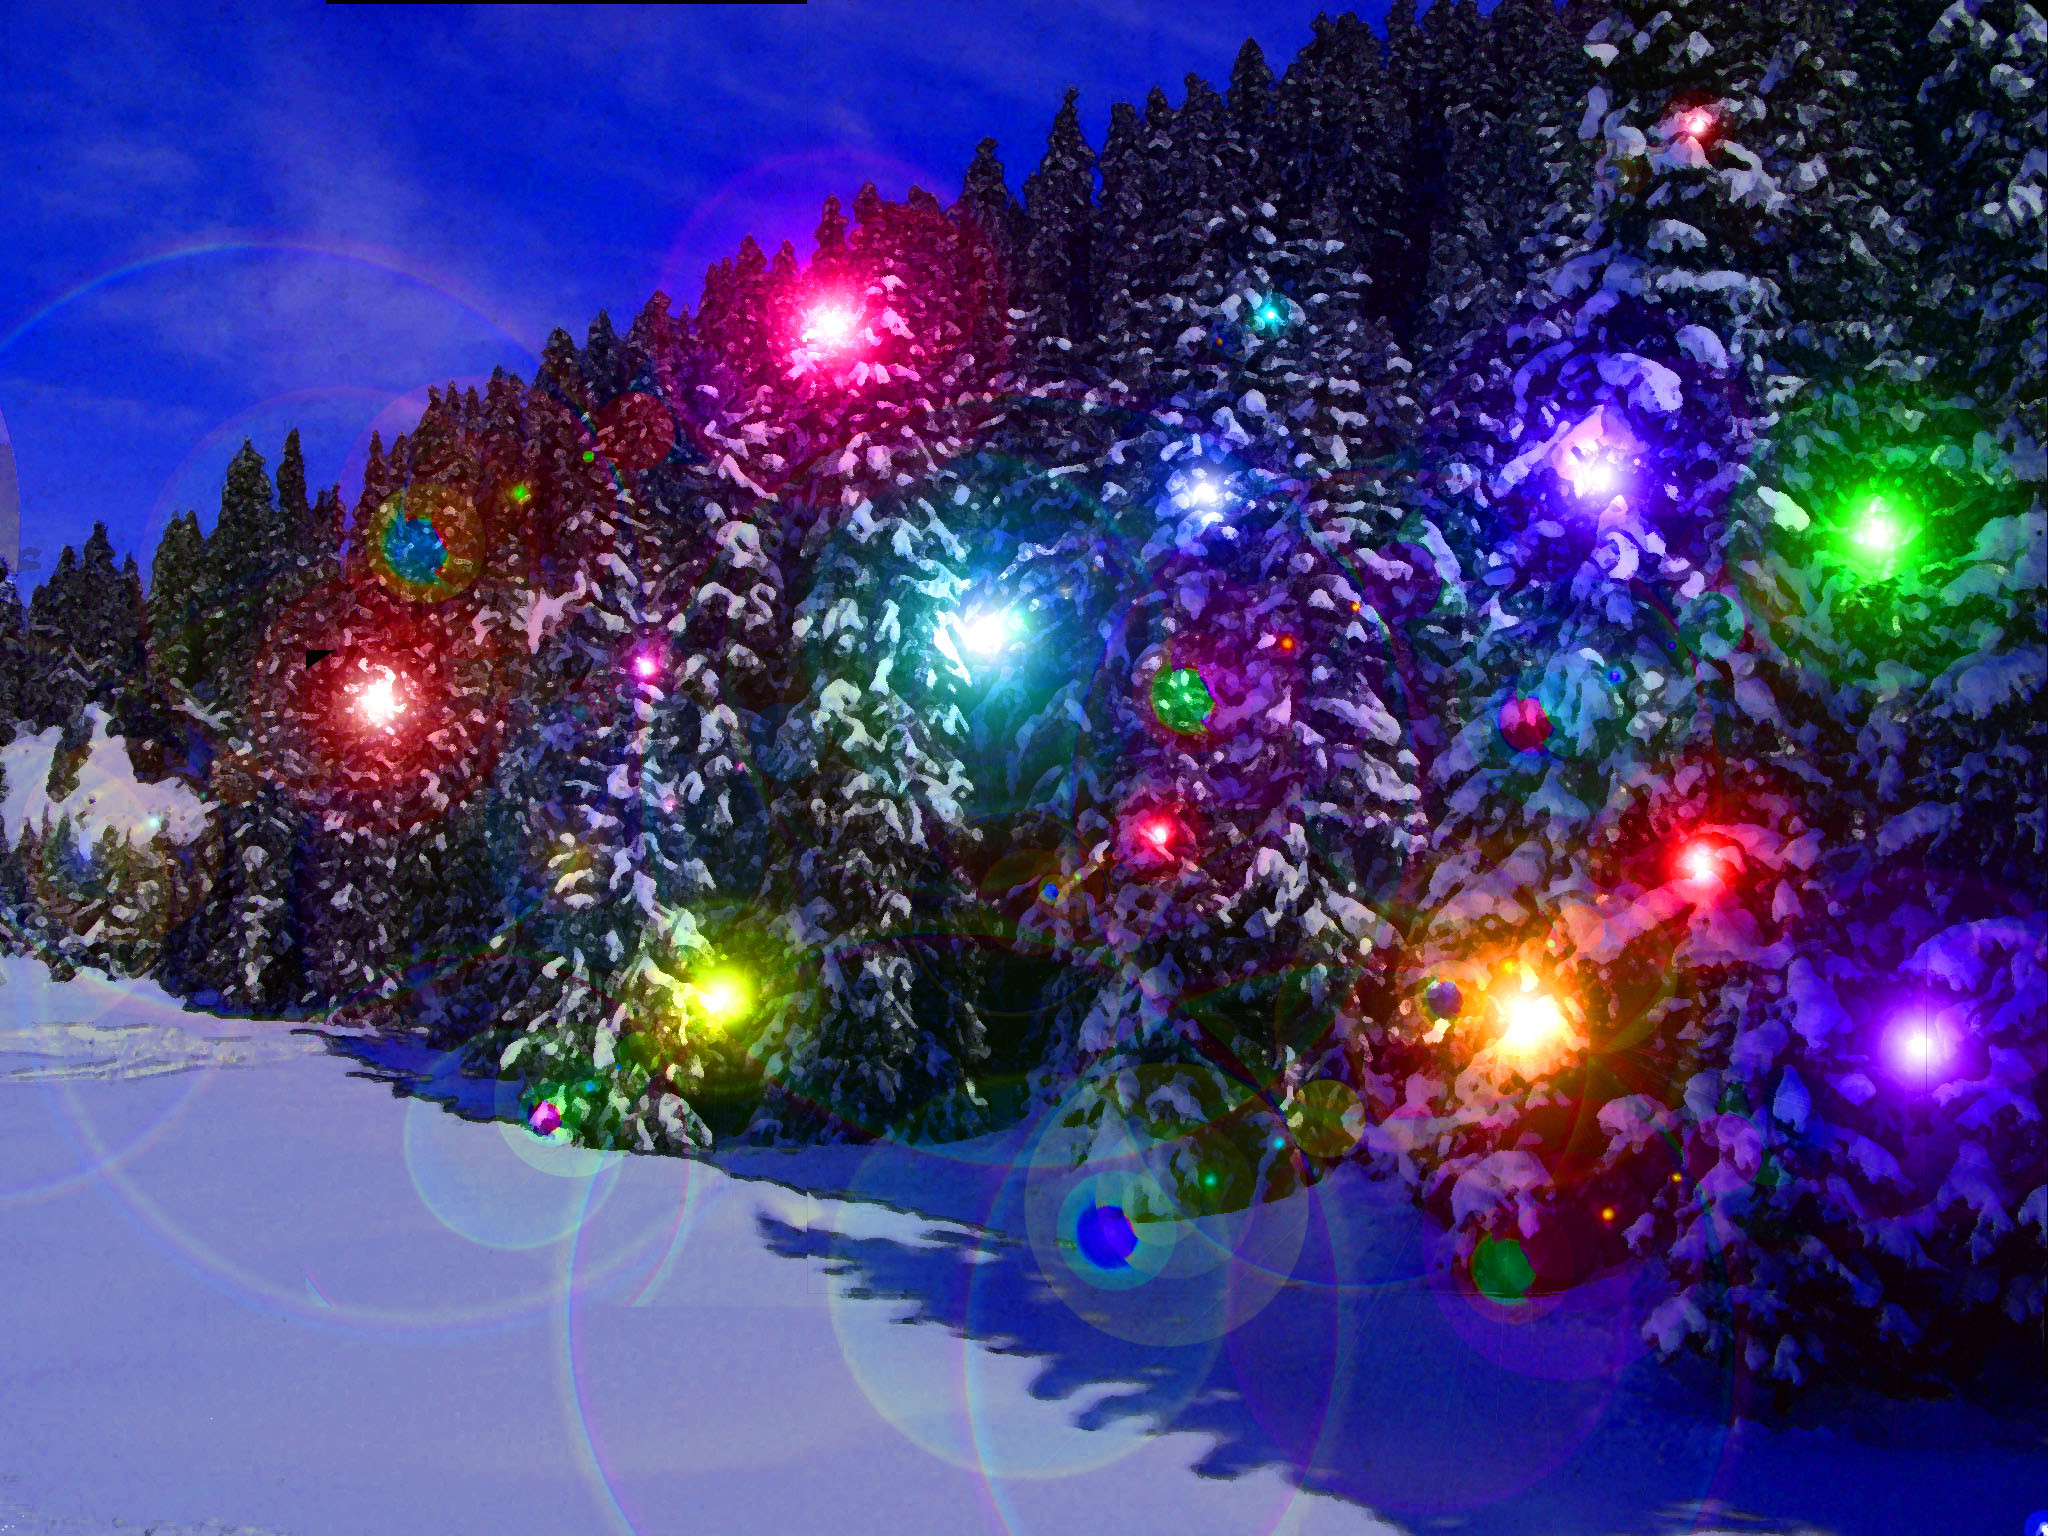 Christmas Wallpaper Hd Free:Amazon.co.uk:Appstore for Android